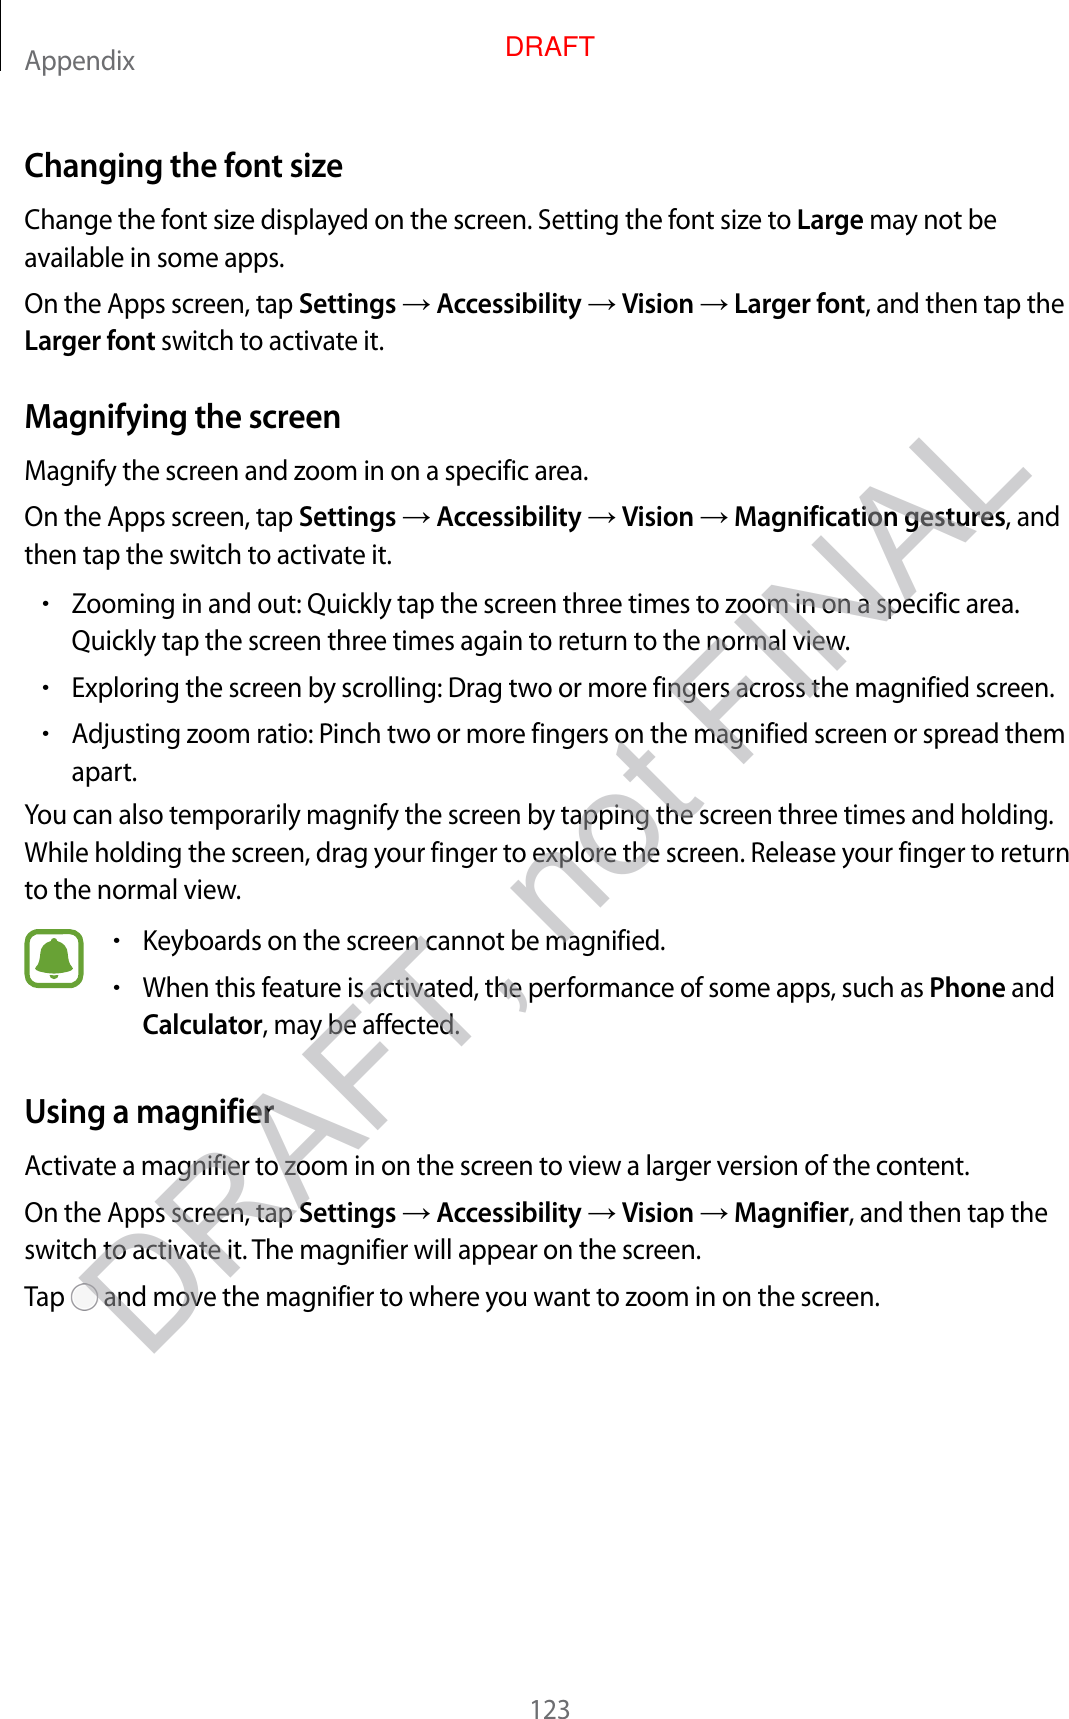 Appendix123Changing the font sizeChange the font size displayed on the screen. Setting the font size to Large may not be available in some apps.On the Apps screen, tap Settings  Accessibility  Vision  Larger font, and then tap the Larger font switch to activate it.Magnifying the screenMagnify the screen and zoom in on a specific area.On the Apps screen, tap Settings  Accessibility  Vision  Magnification gestures, and then tap the switch to activate it.•Zooming in and out: Quickly tap the screen three times to zoom in on a specific area. Quickly tap the screen three times again to return to the normal view.•Exploring the screen by scrolling: Drag two or more fingers across the magnified screen.•Adjusting zoom ratio: Pinch two or more fingers on the magnified screen or spread them apart.You can also temporarily magnify the screen by tapping the screen three times and holding. While holding the screen, drag your finger to explore the screen. Release your finger to return to the normal view.•Keyboards on the screen cannot be magnified.•When this feature is activated, the performance of some apps, such as Phone and Calculator, may be affected.Using a magnifierActivate a magnifier to zoom in on the screen to view a larger version of the content.On the Apps screen, tap Settings  Accessibility  Vision  Magnifier, and then tap the switch to activate it. The magnifier will appear on the screen.Tap   and move the magnifier to where you want to zoom in on the screen.DRAFT, not FINALDRAFT